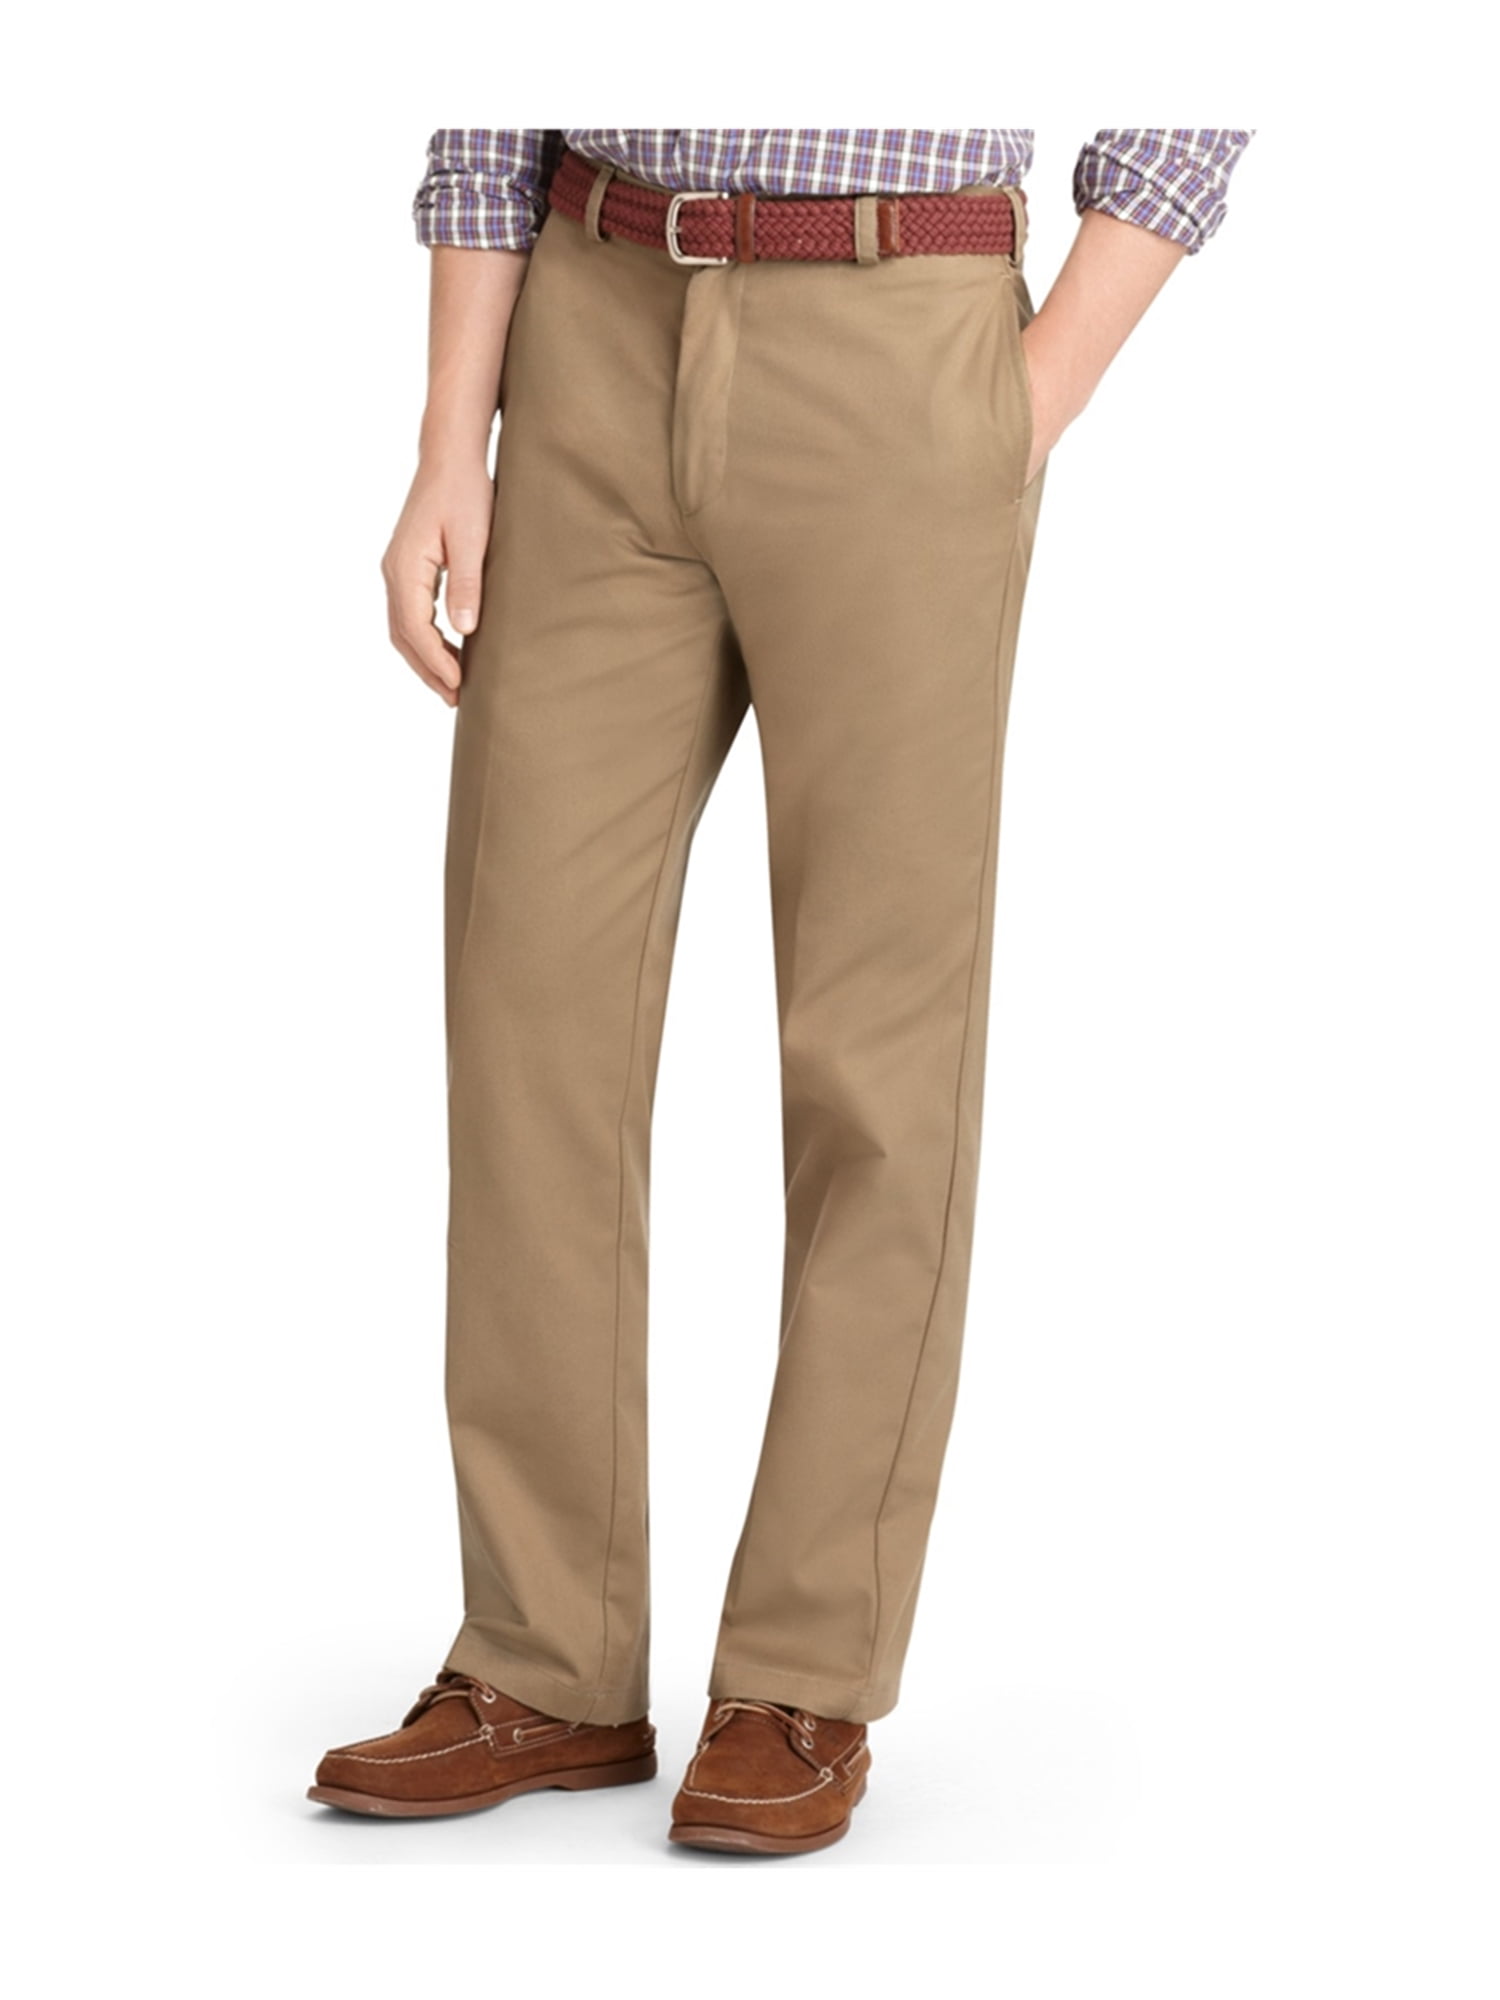 IZOD Mens American Chino Flat Front Classic Fit Pant 